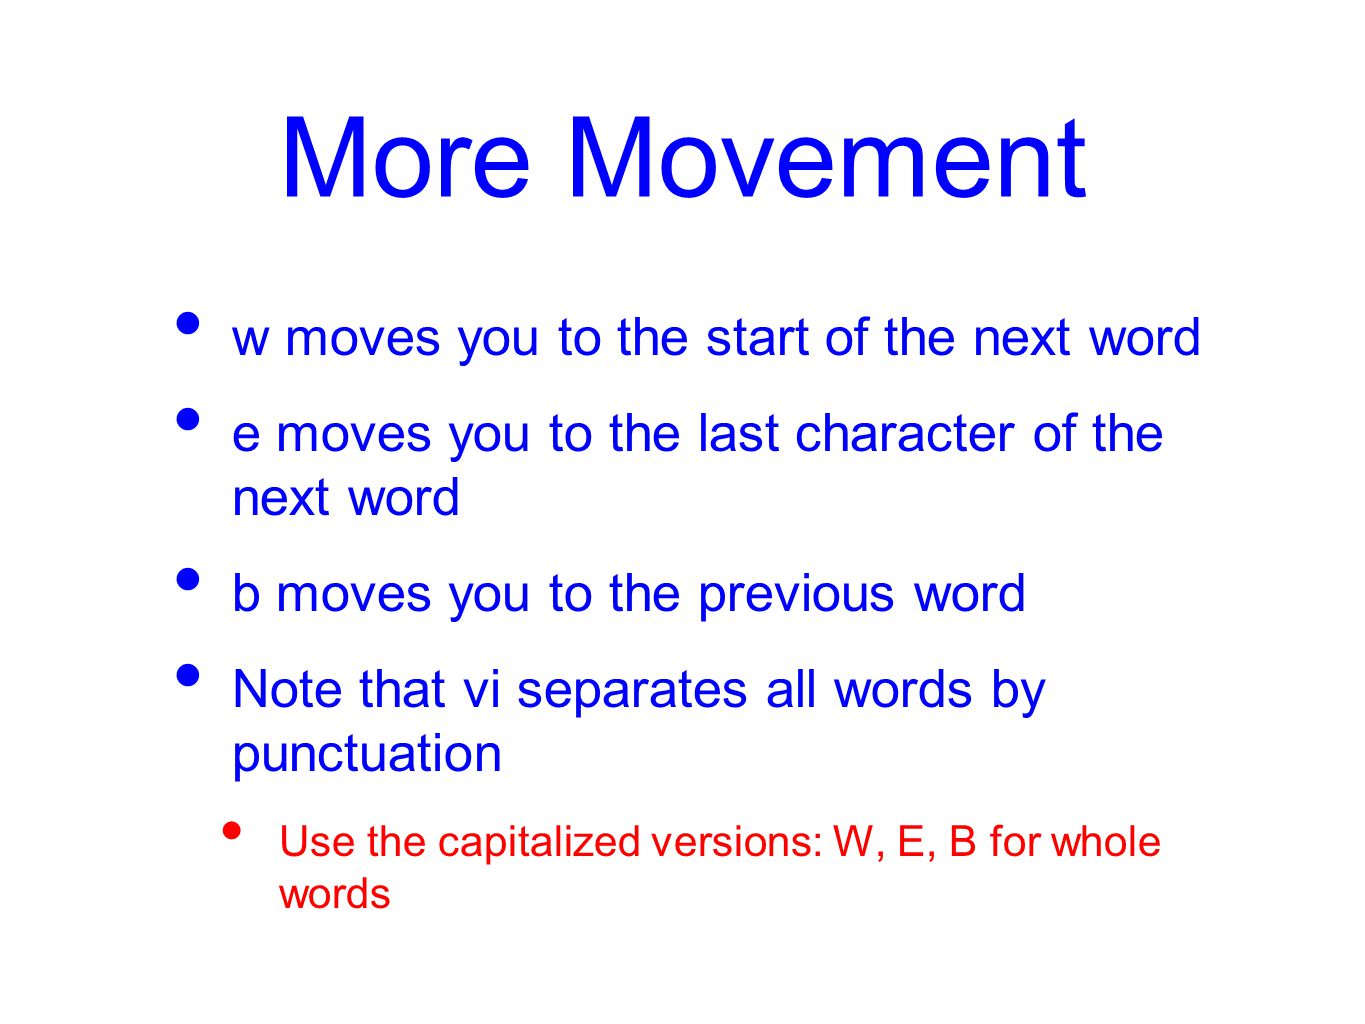 More Movement w moves you to the start of the next word e moves you to the last character of the next word b moves you to the previous word Note that vi separates all words by punctuation Use the capitalized versions: W, E, B for whole words